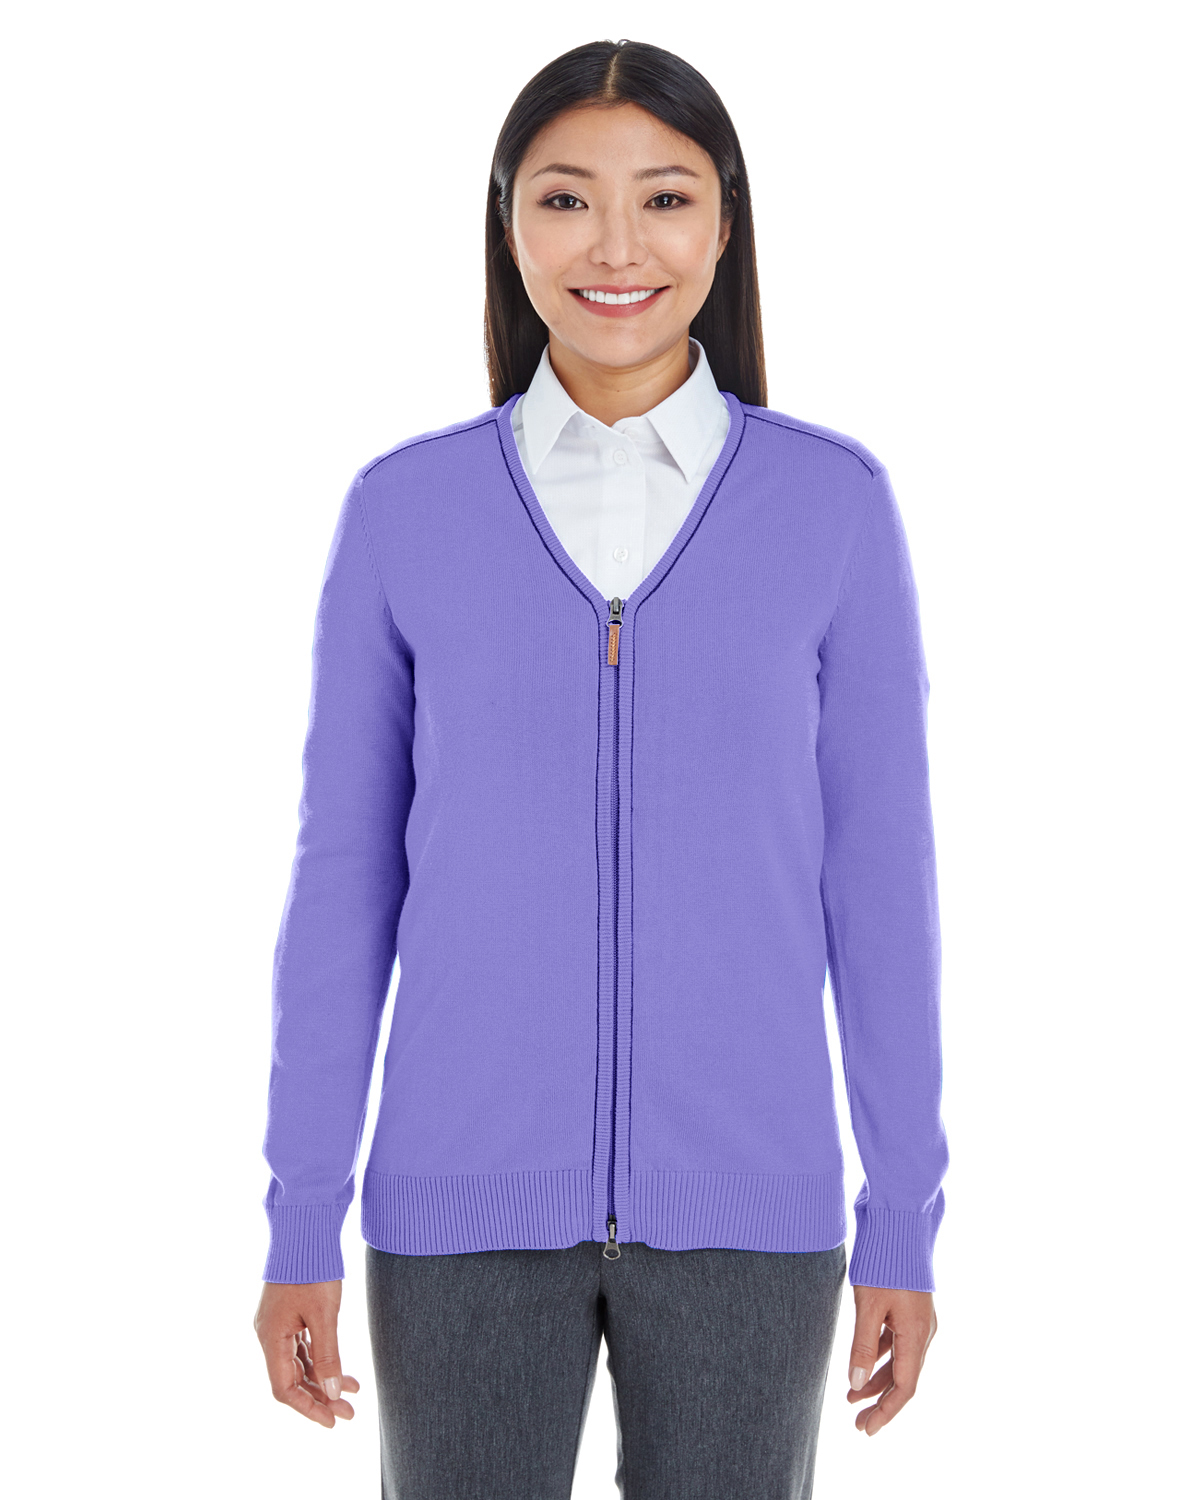 click to view GRAPE/ NAVY